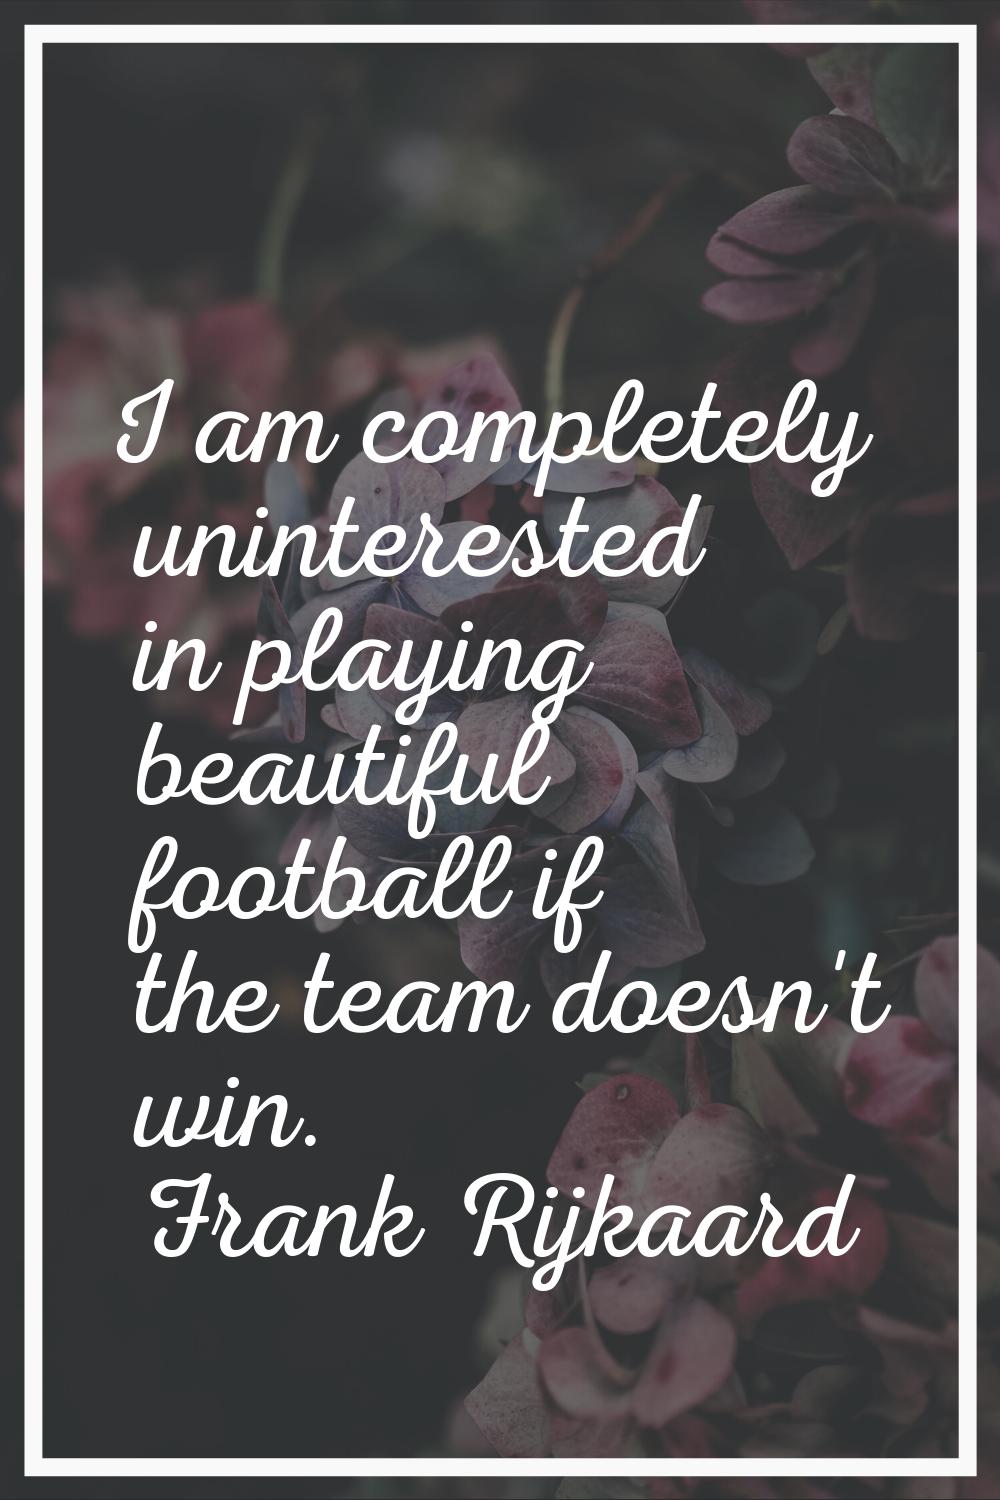 I am completely uninterested in playing beautiful football if the team doesn't win.